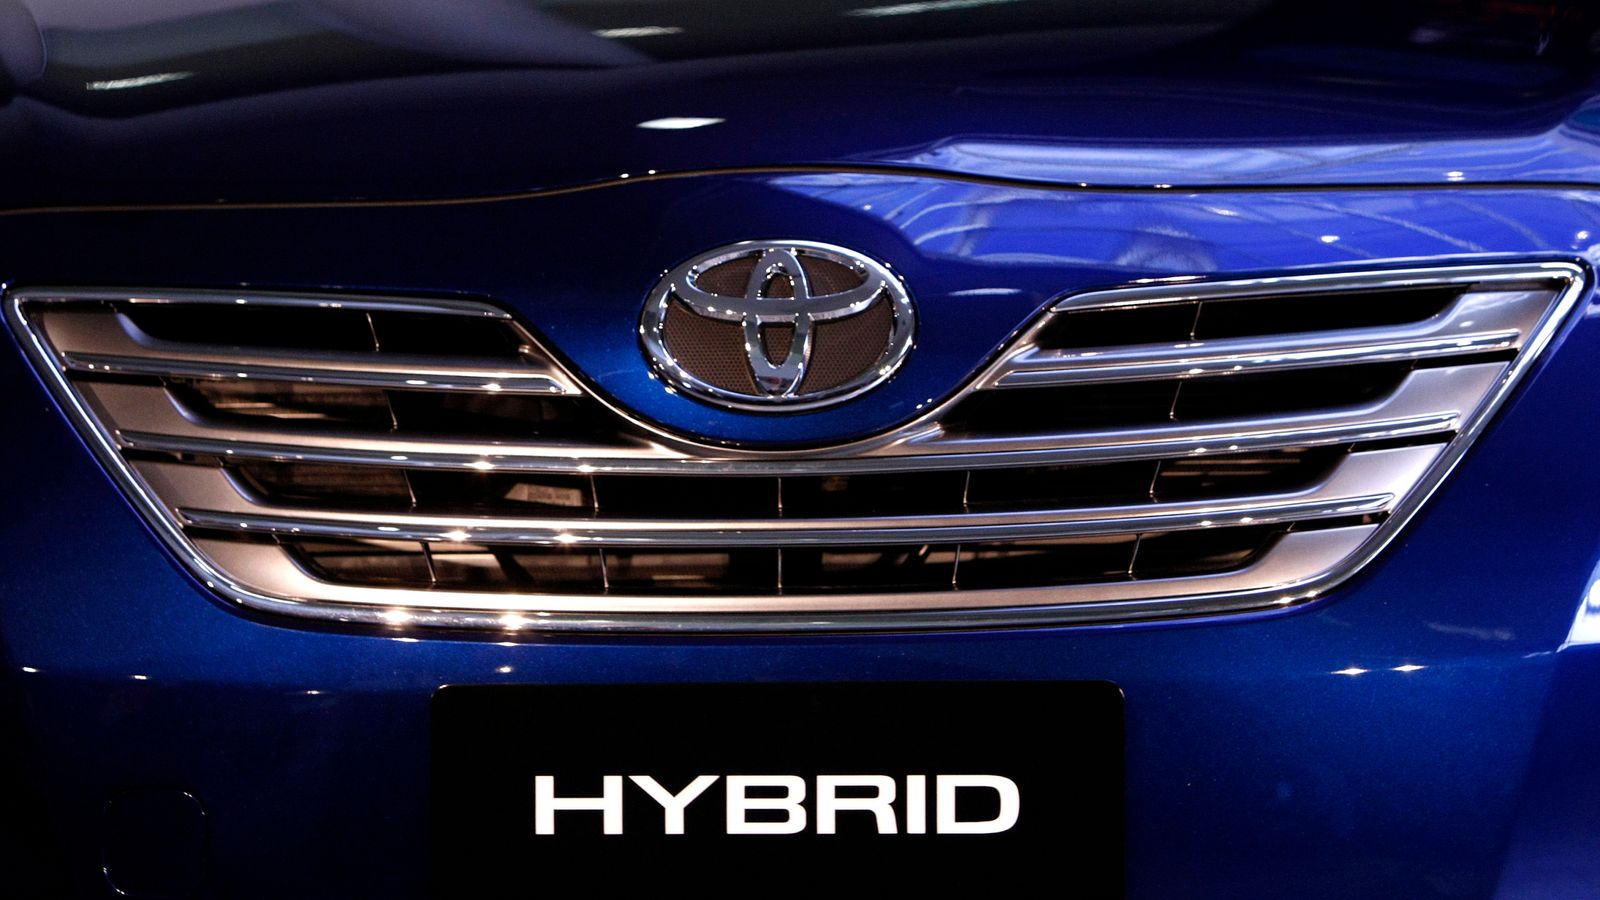 Toyota to recall 1.12 million vehicles over potential airbag issue